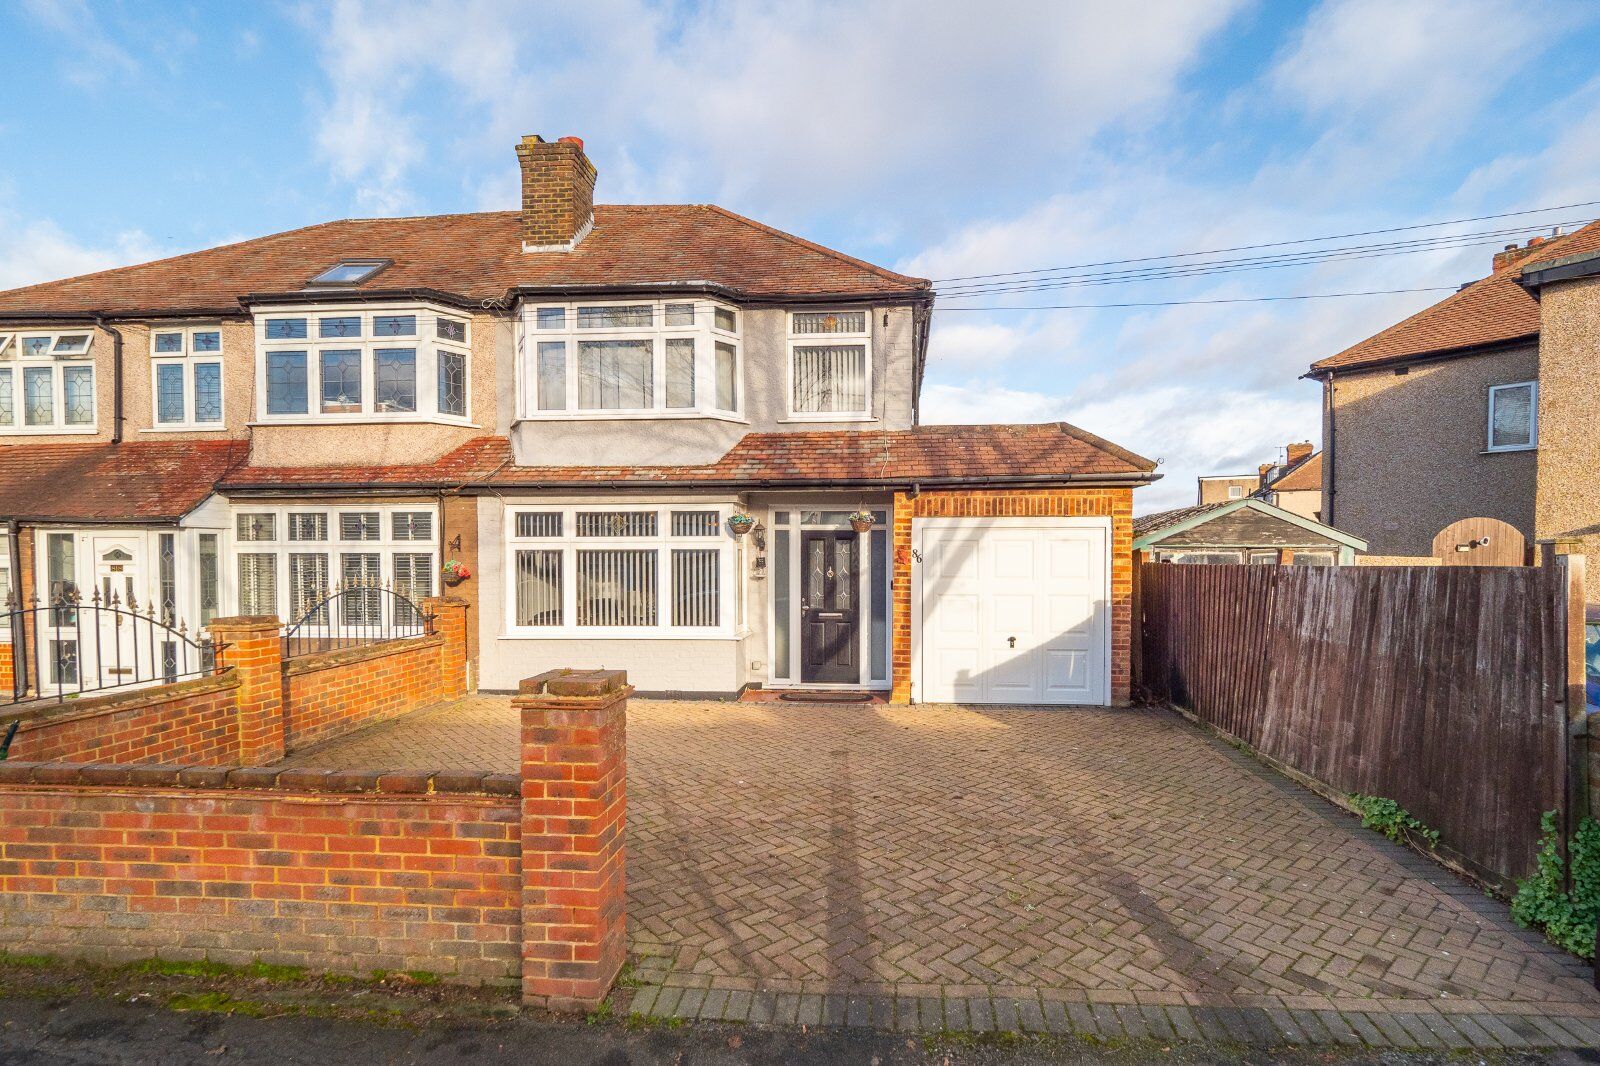 4 bedroom semi detached house for sale Windsor Avenue, Cheam, SM3, main image